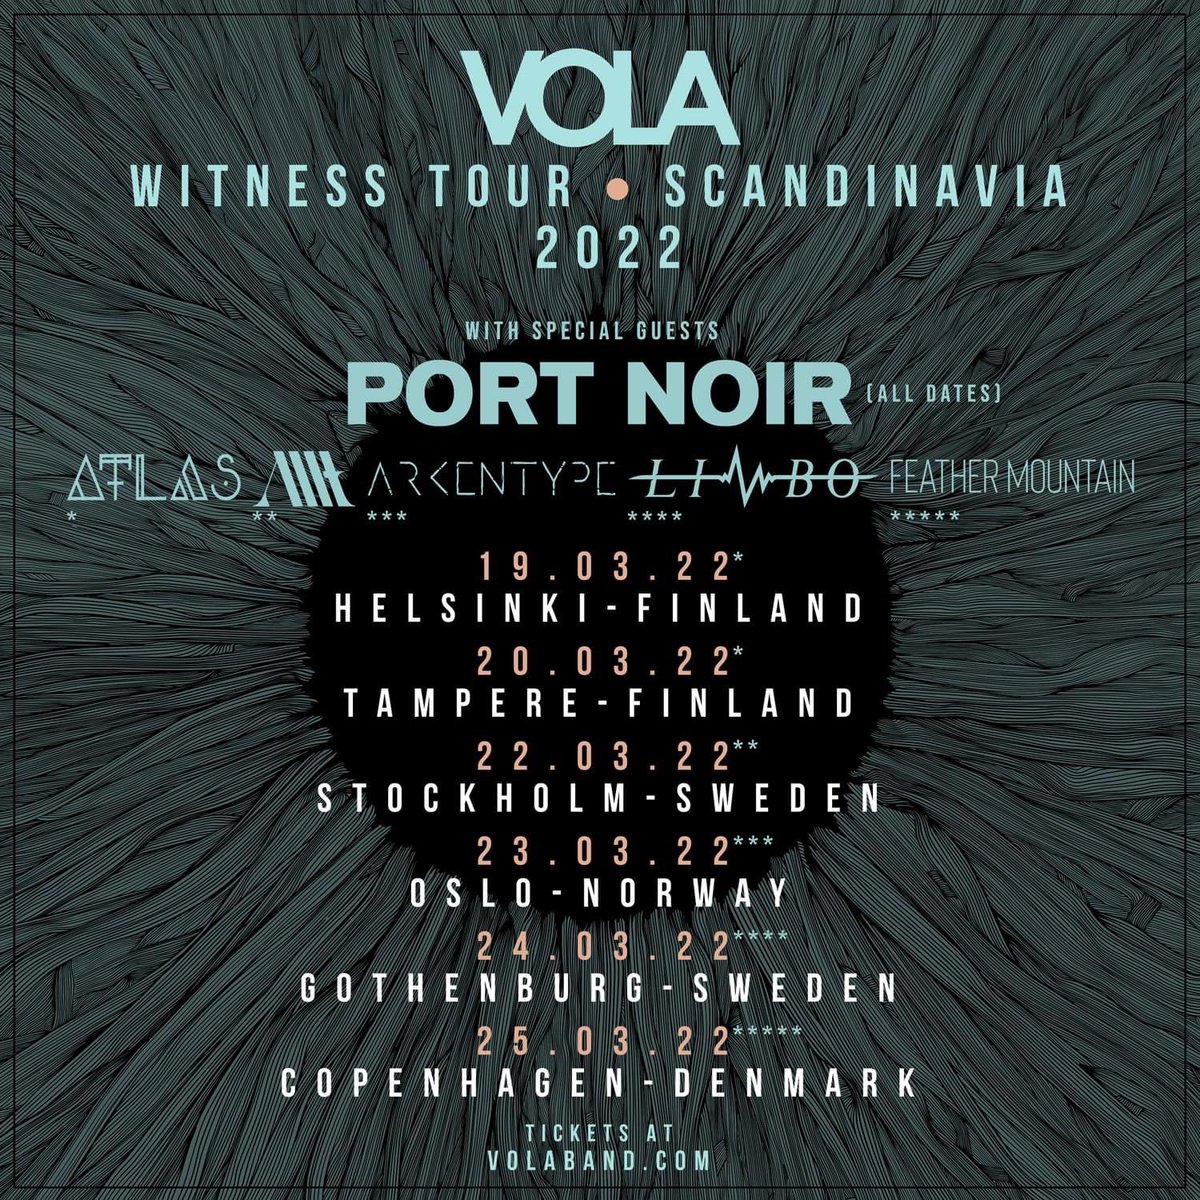 We are opening the stage for our brothers in VOLA and PORT NOIR here in Finland next march! Get your tickets immediately, Helsinki is almost sold out and Tampere is selling fast!

#vola #portnoir #northcore #tour https://t.co/6Btd0gG01B